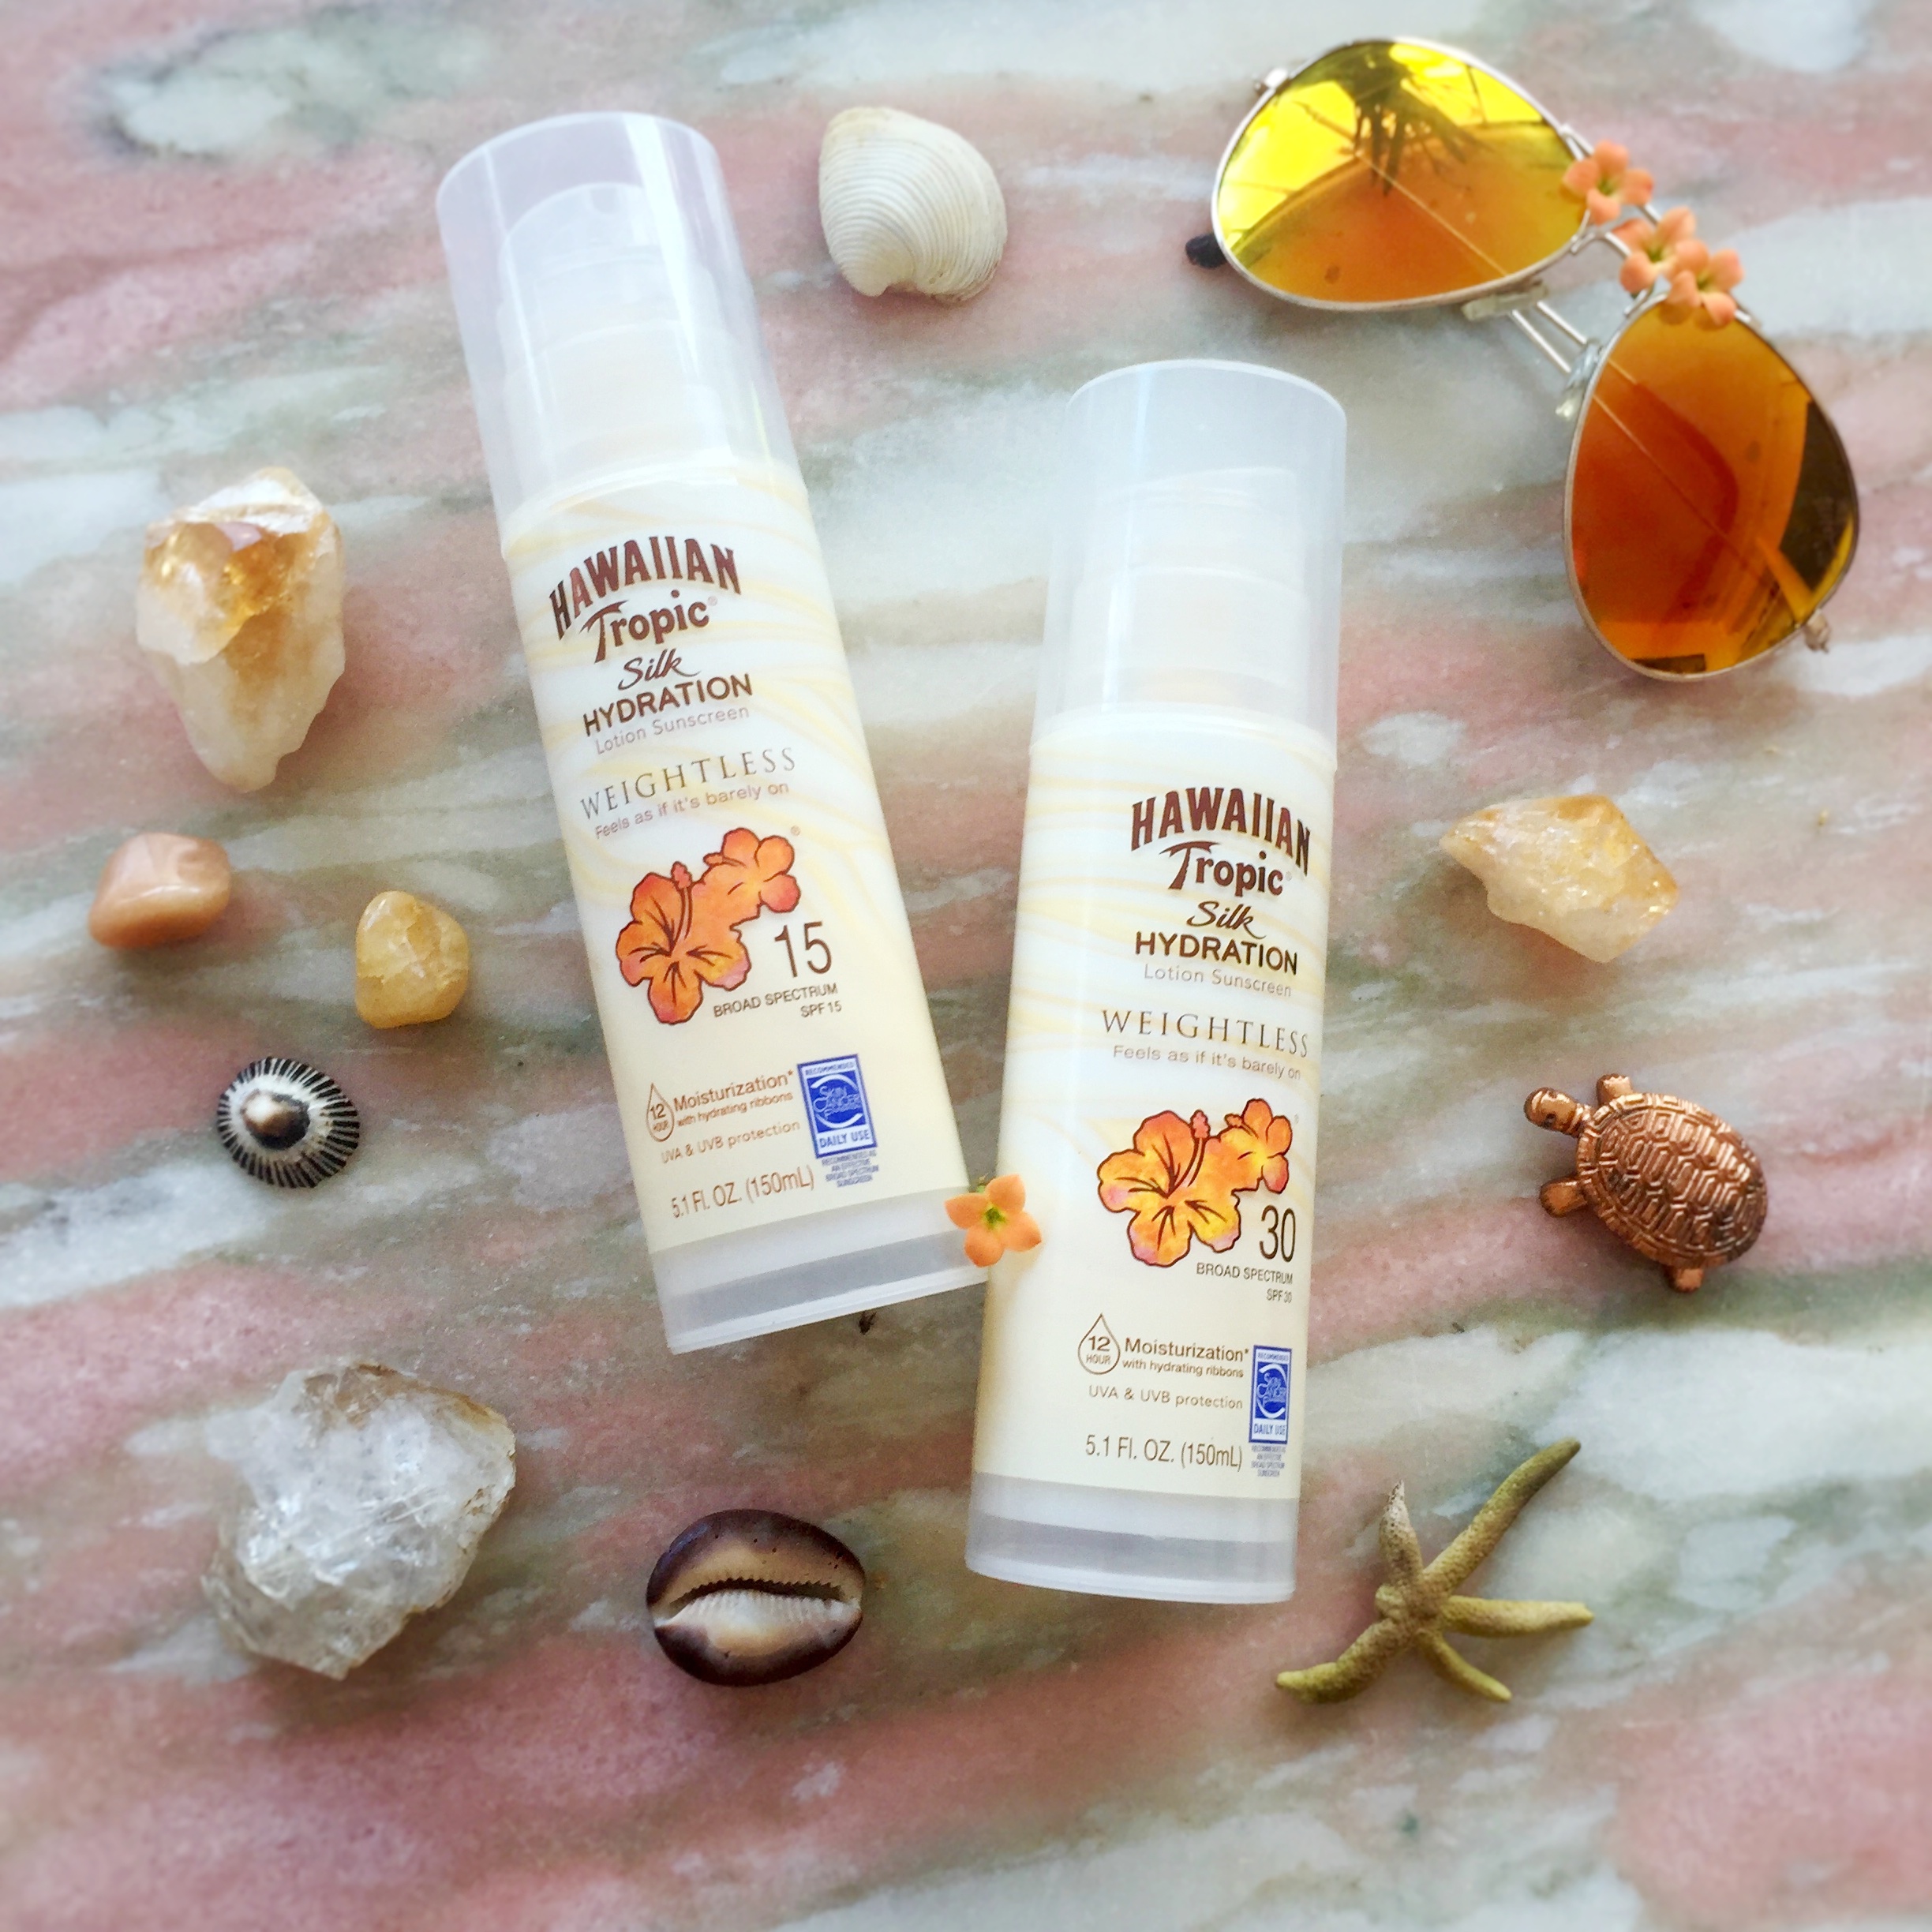 Hawaiian Tropic Silk Hydration Weightless Lotion Sunscreen is available in broad spectrum UVA and UVB SPF 15 and 30